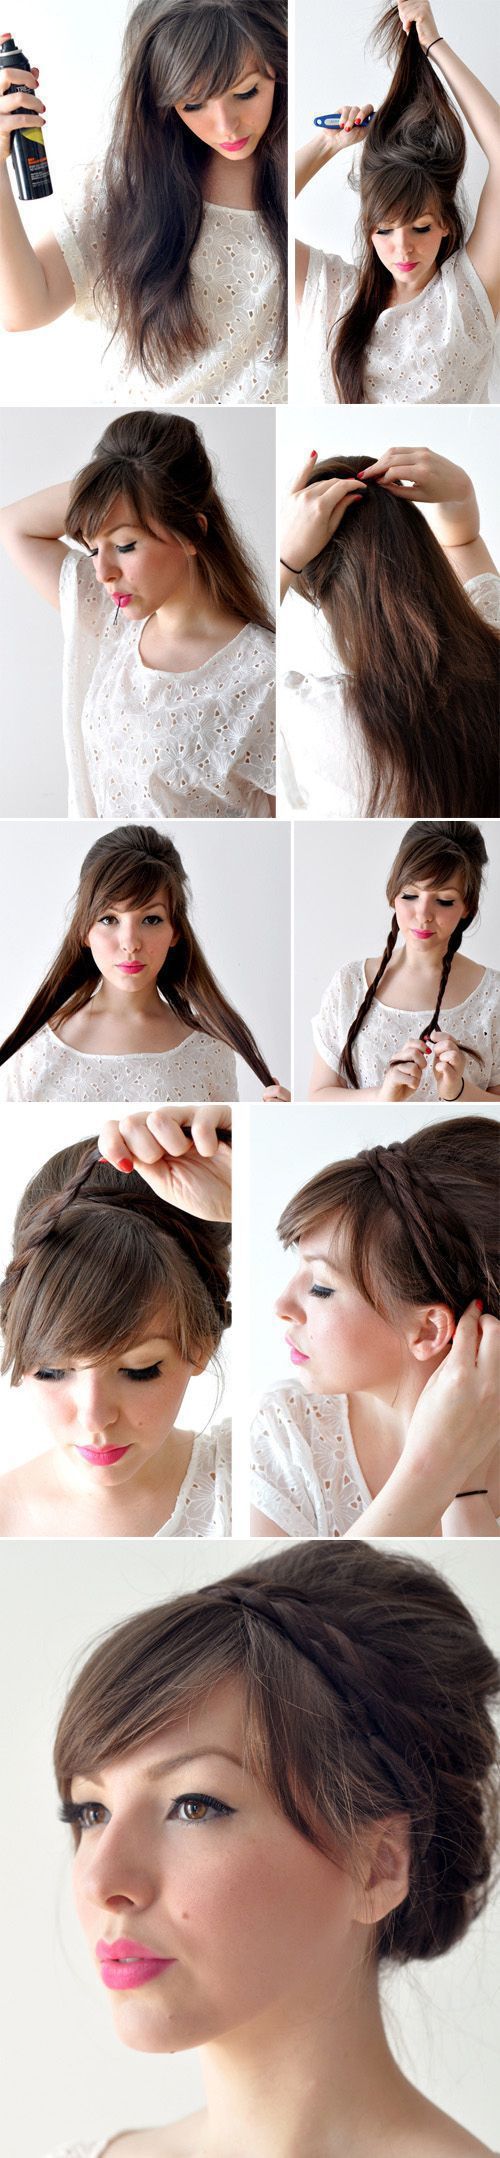 Easy Hairstyles For Short Hair At Home Haircuts